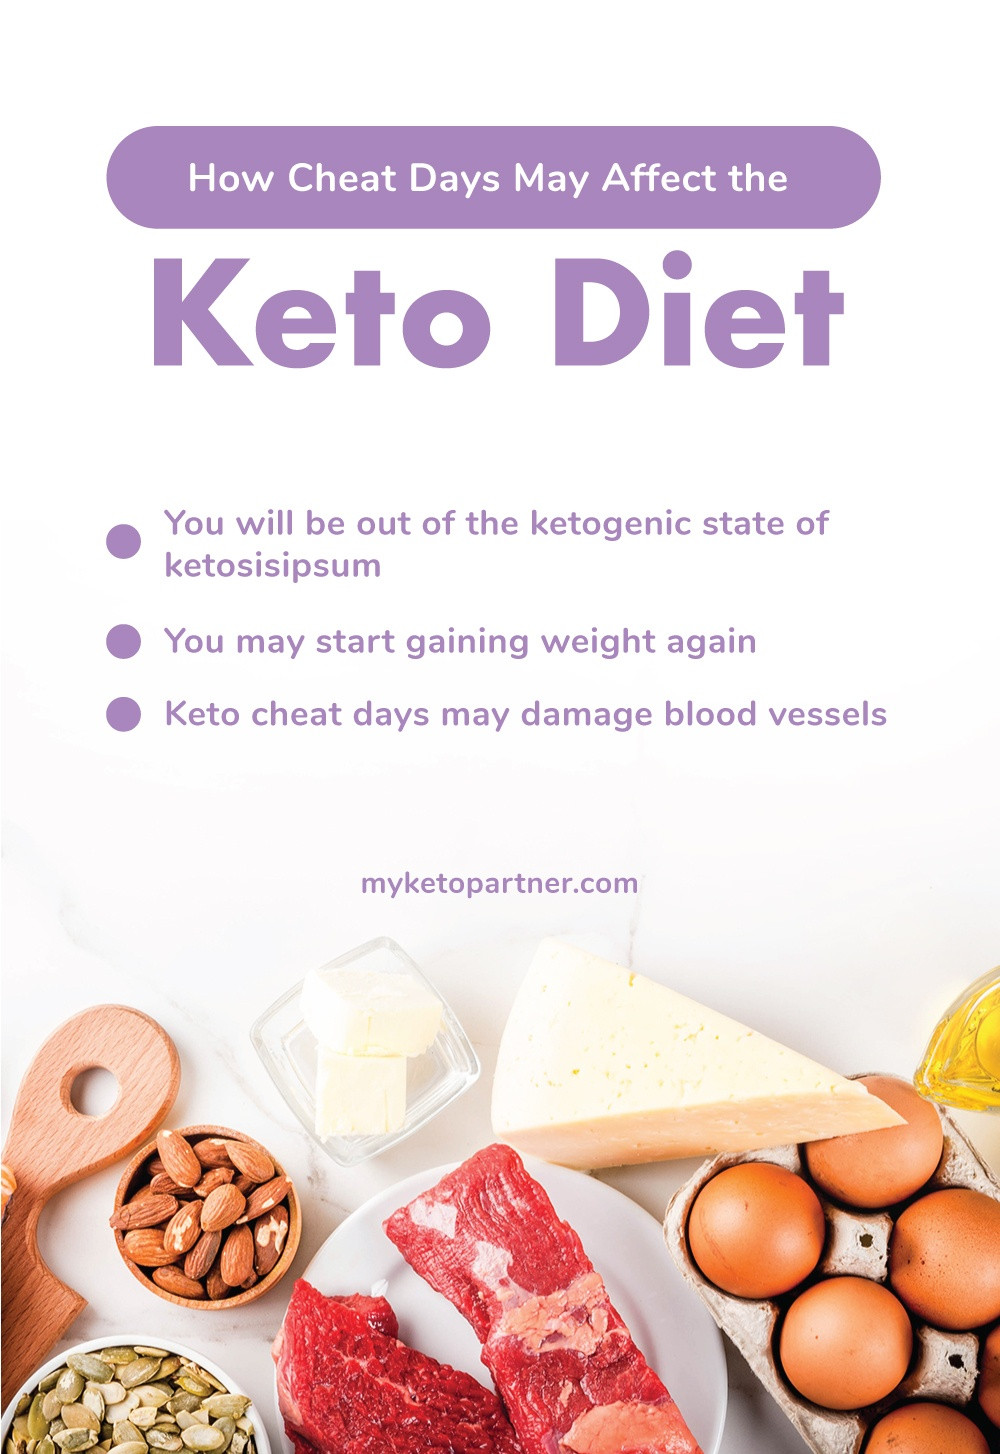 Keto Diet Cheat Day
 Should You Have a Cheat Day While on Keto Diet